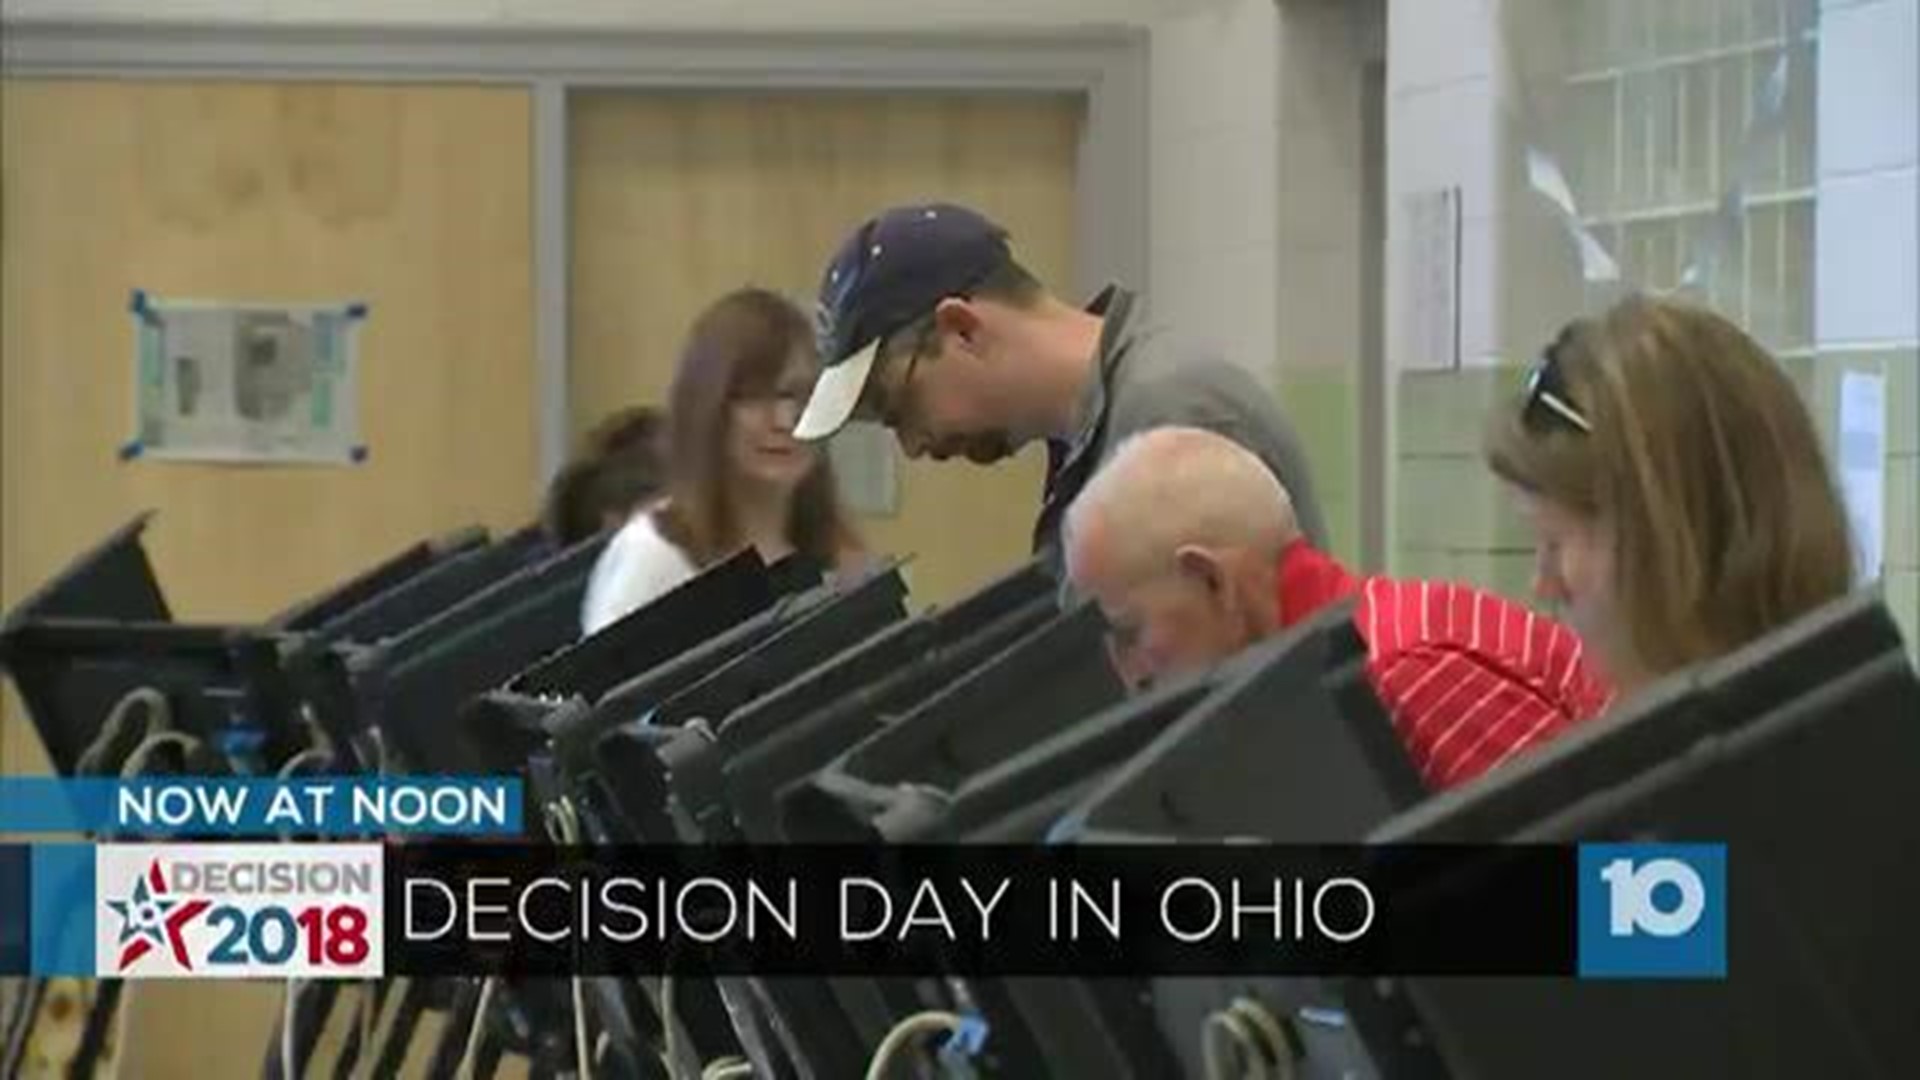 Central Ohio Voters Guide What's on your ballot?